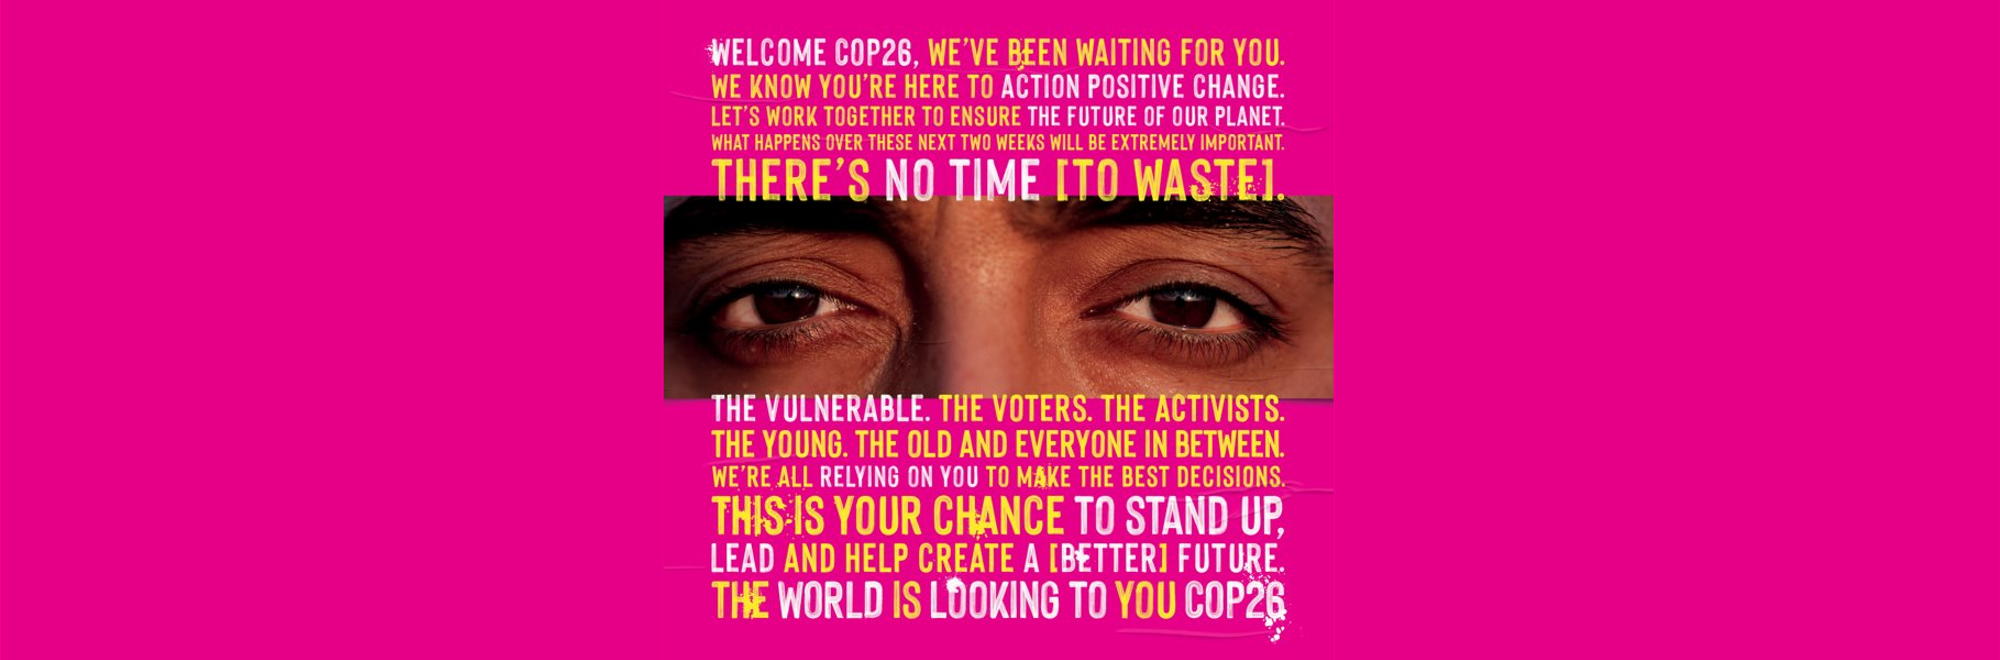 Powerful OOH campaign brings the alarming reality of climate change to the corridors of COP